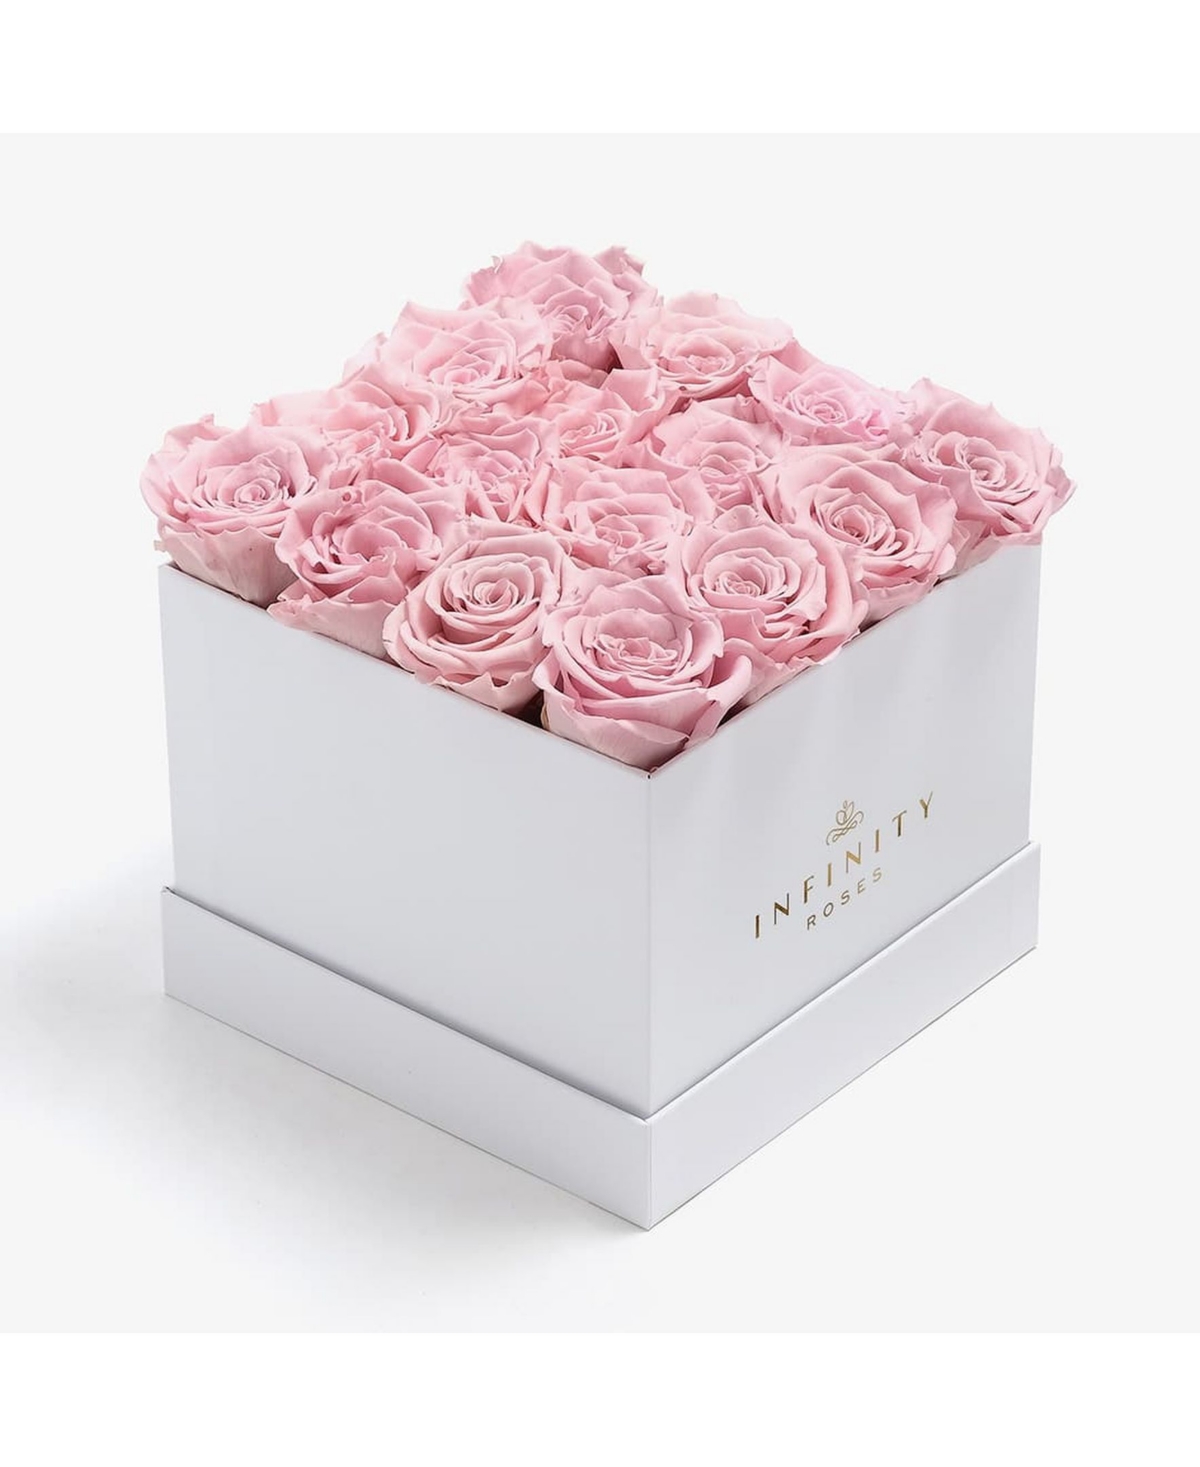 Square Box of 16 Pink Real Roses Preserved to Last Over a Year - Pink